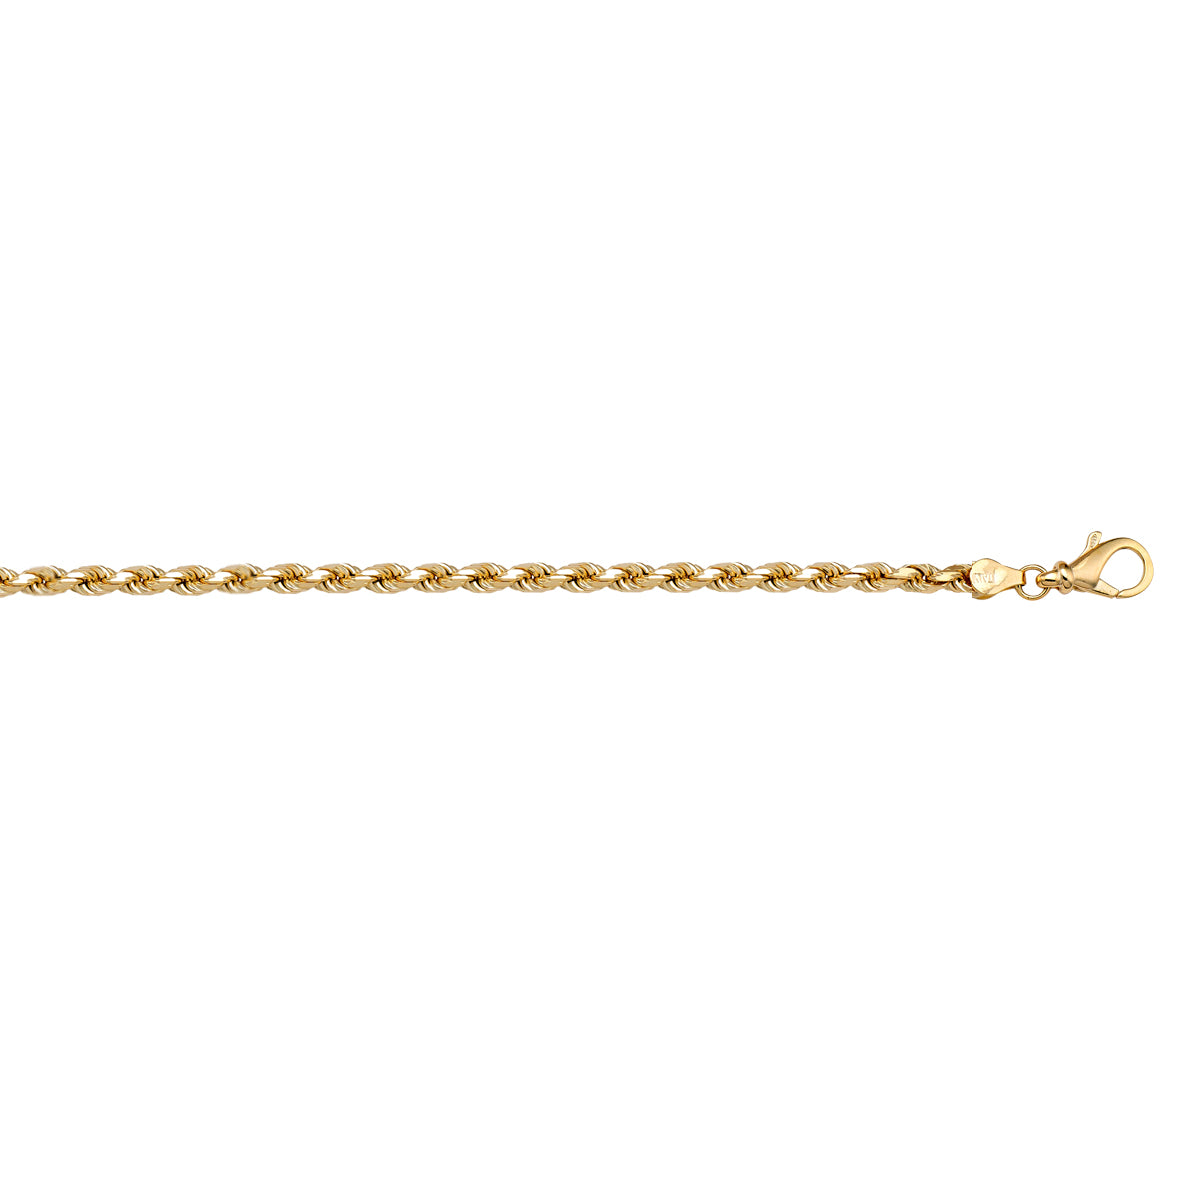 BRACELETS YELLOW GOLD SOLID ROPE LINK